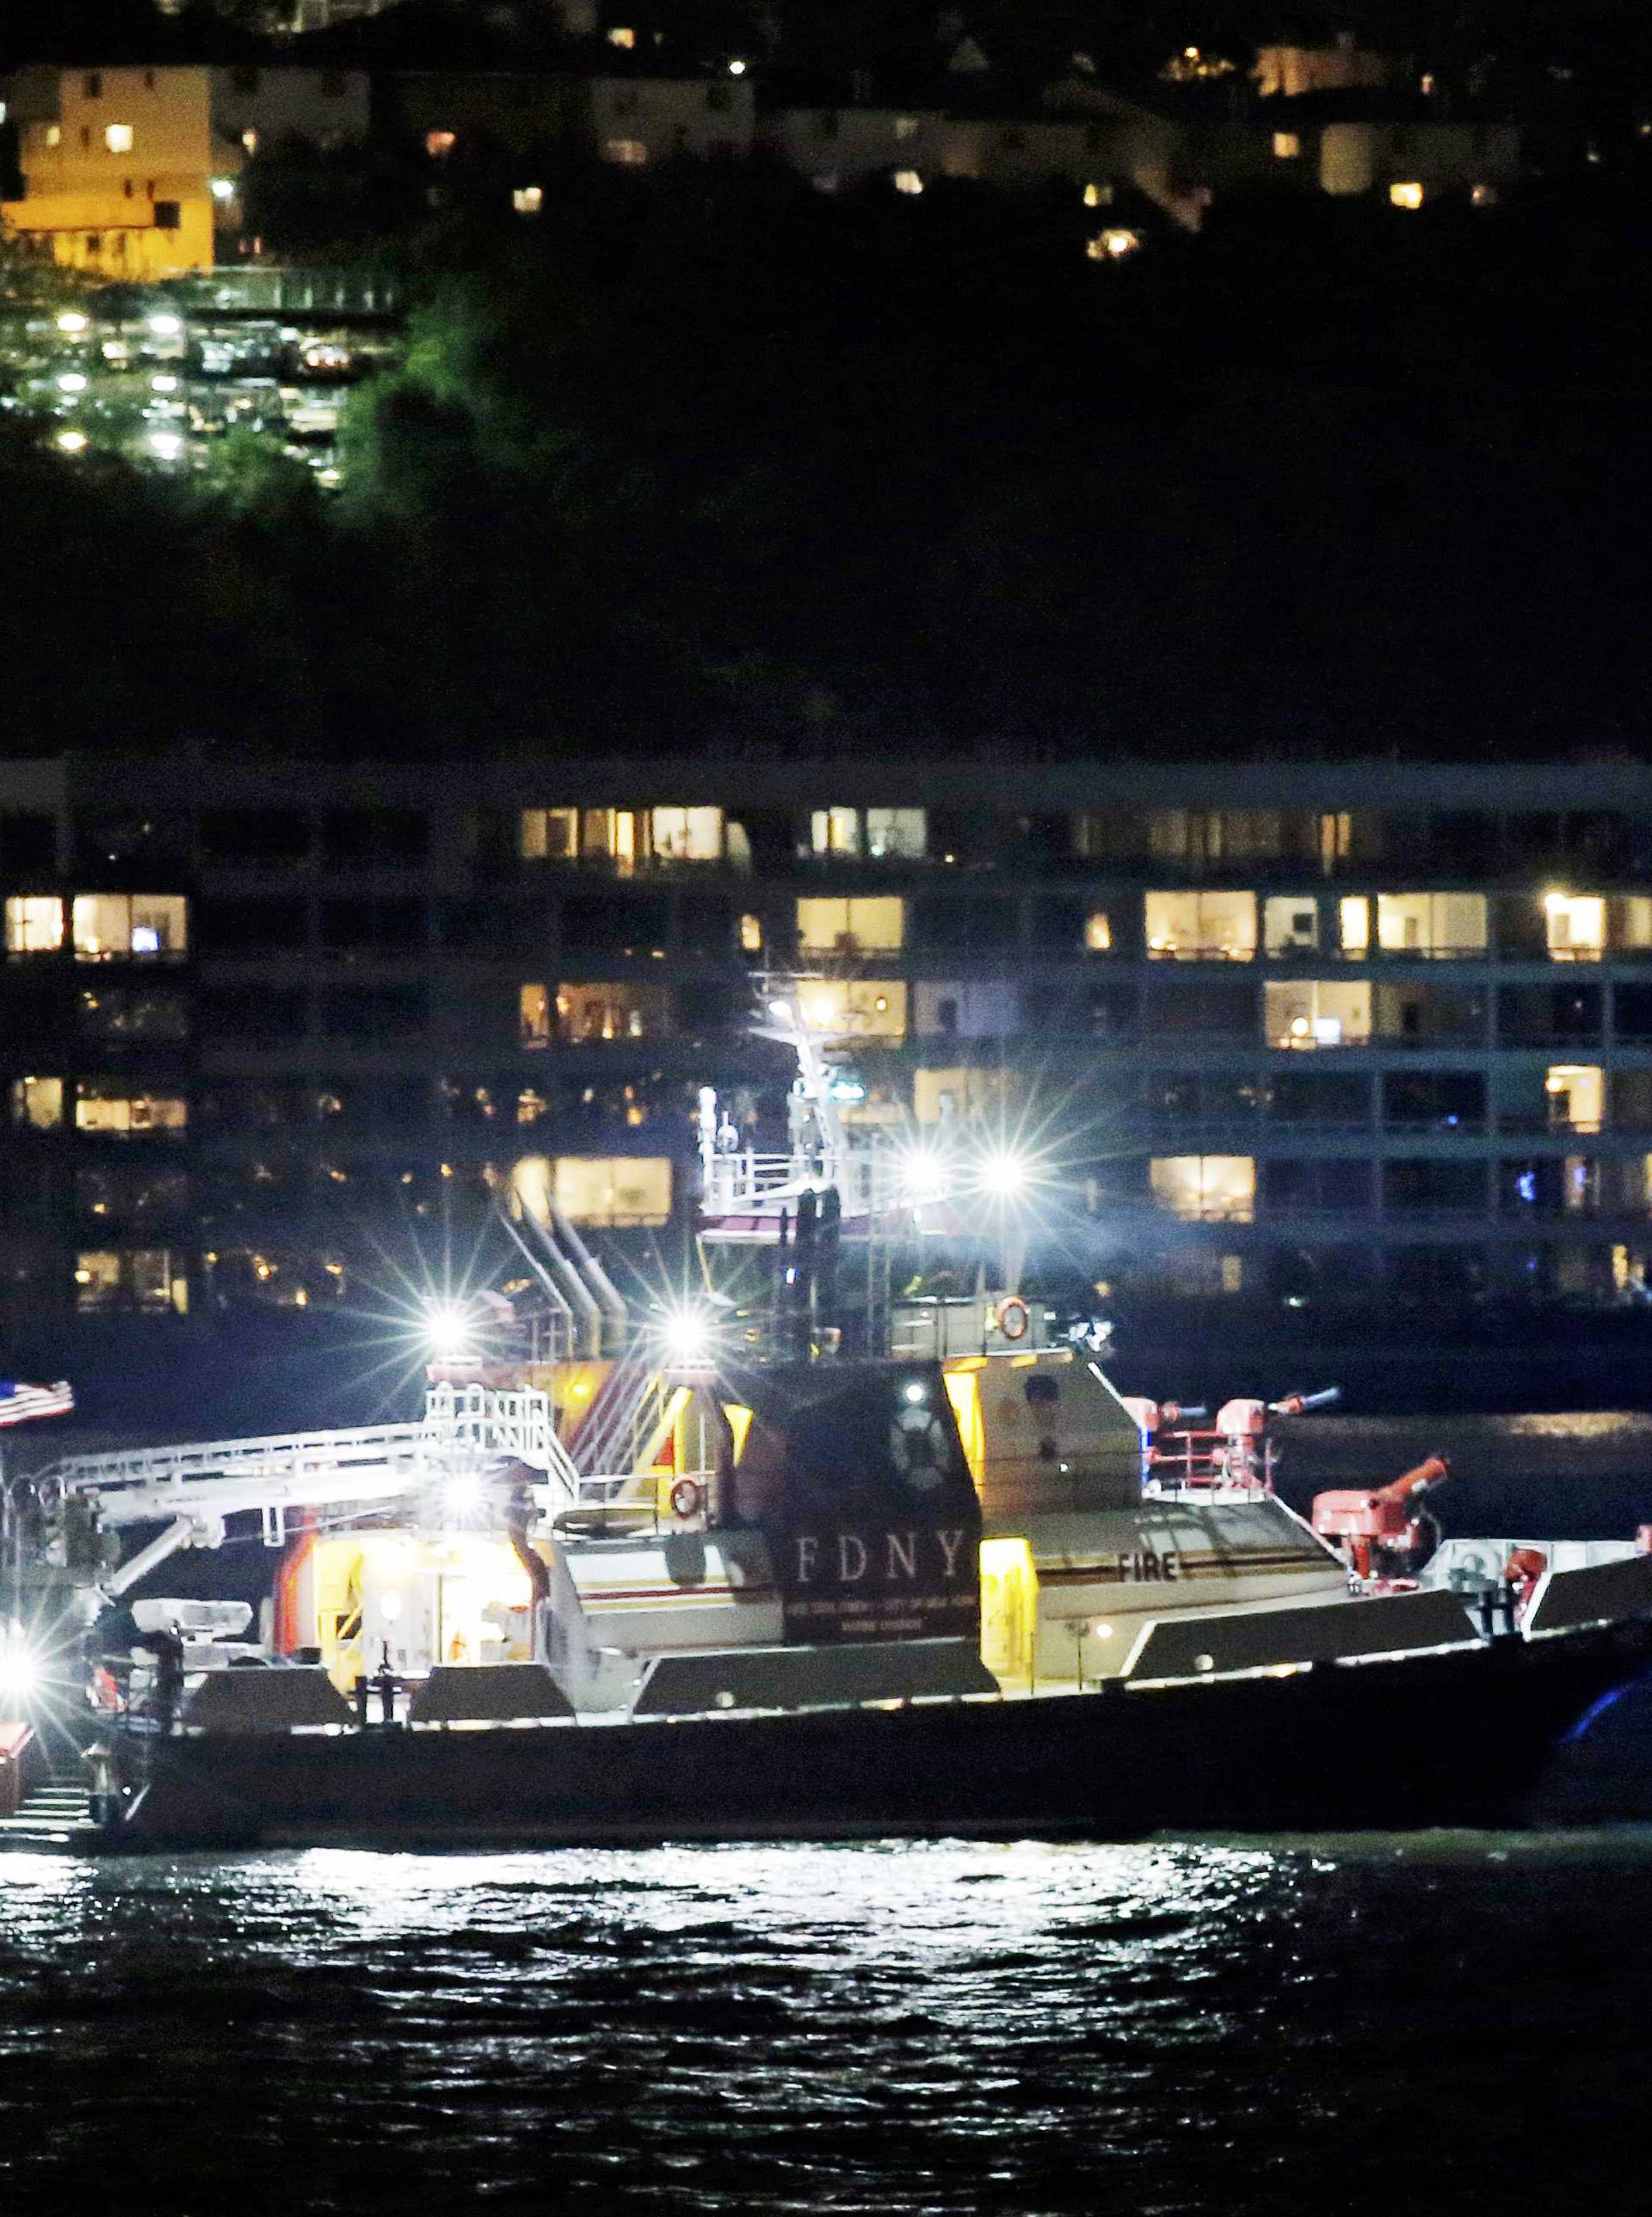 An FDNY fire department boat searches the Hudson River for the wreckage of a vintage P-47 Thunderbolt airplane that crashed in the river in New York City